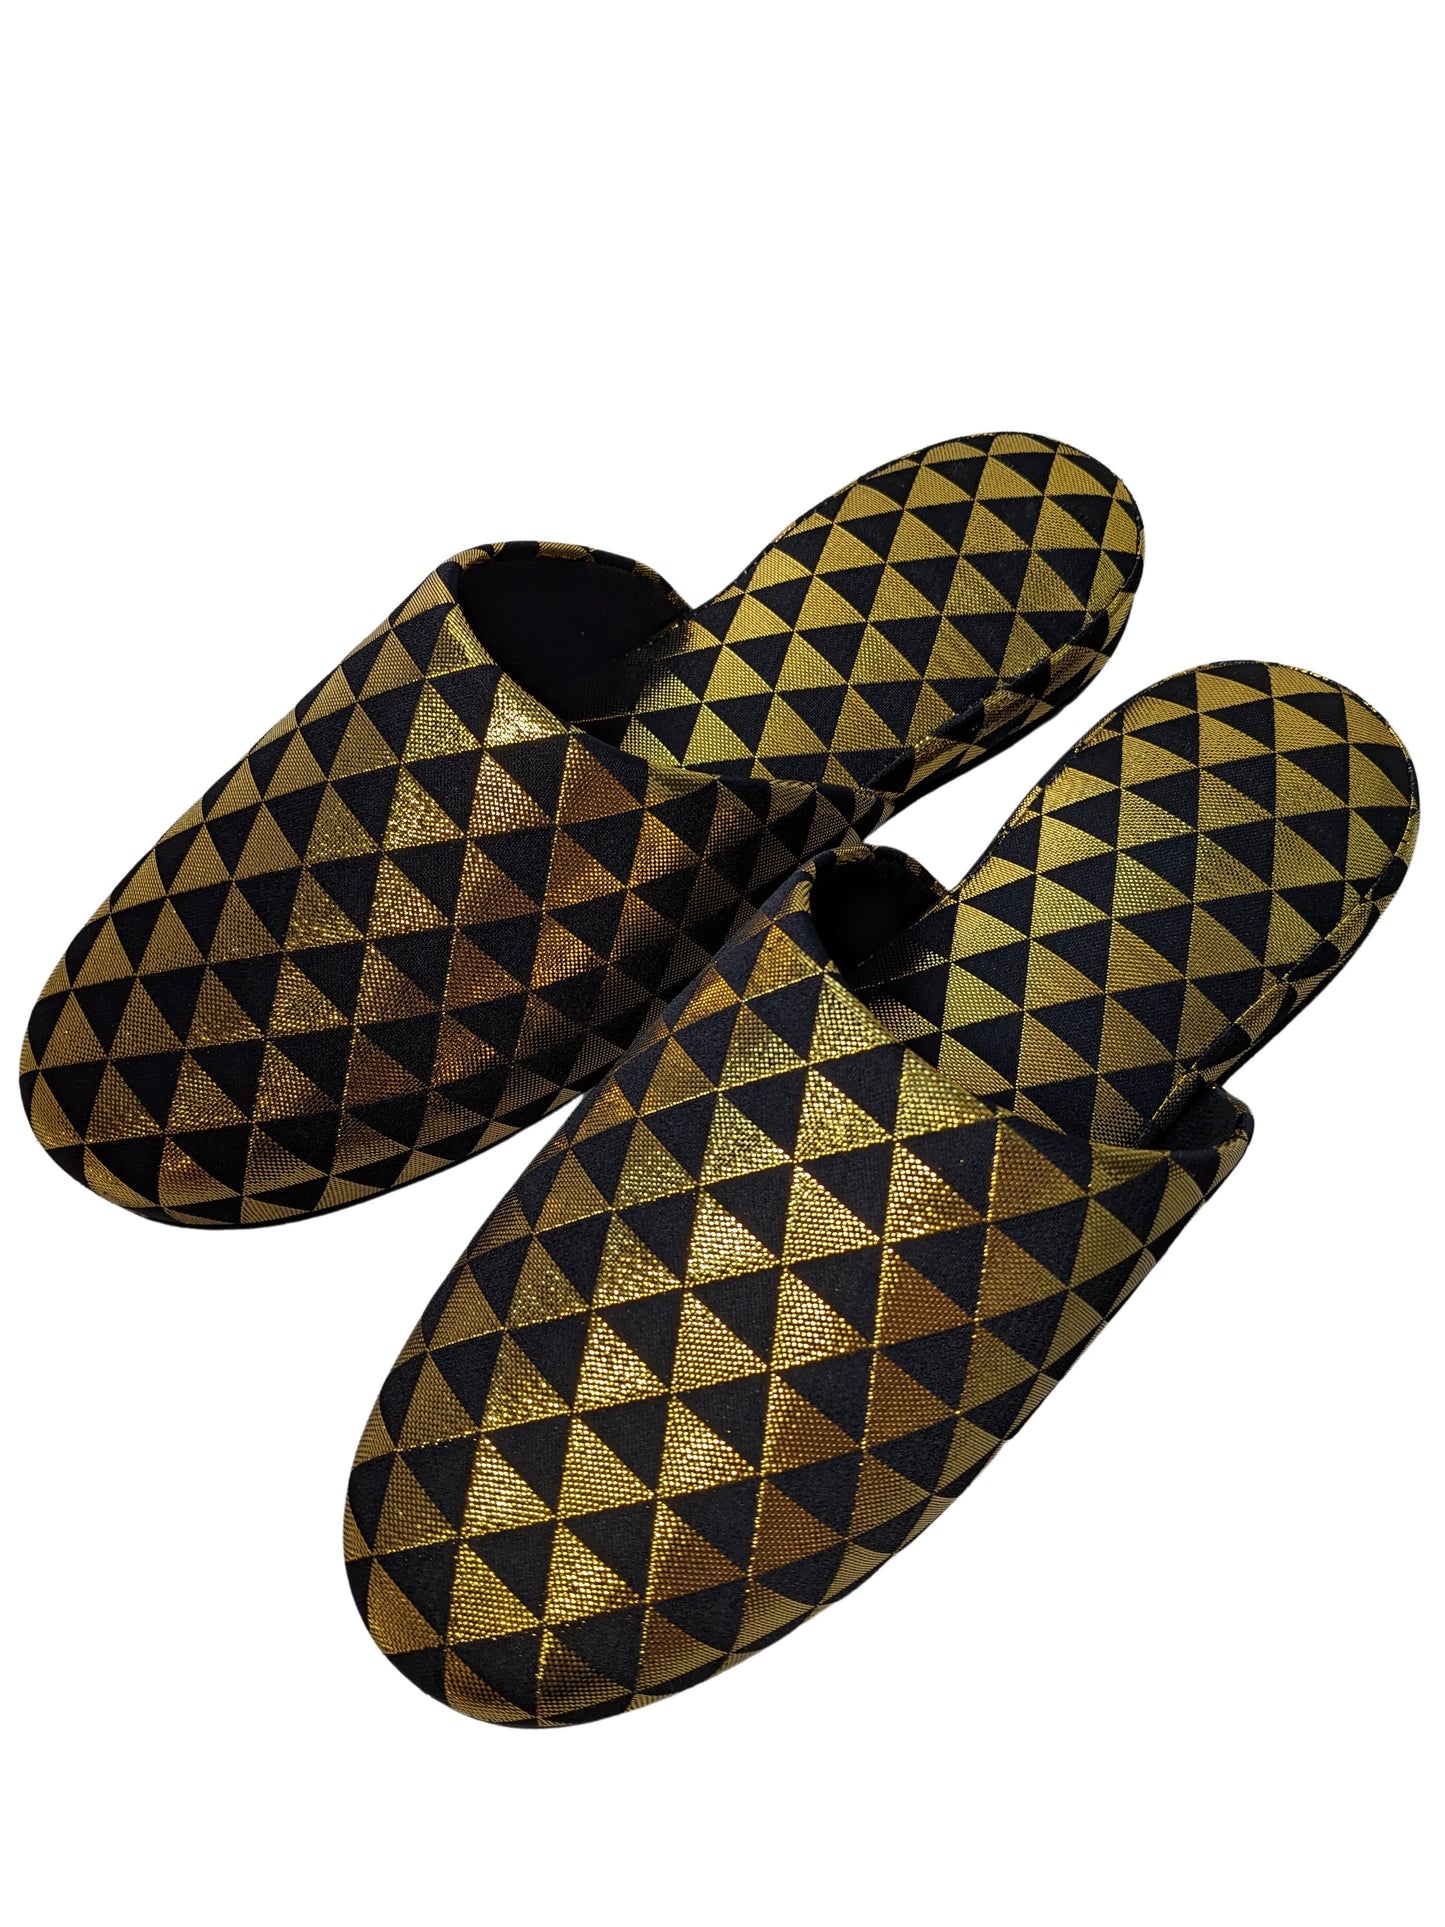 Black Gold Triangle Shiny Slippers [Large / XL]